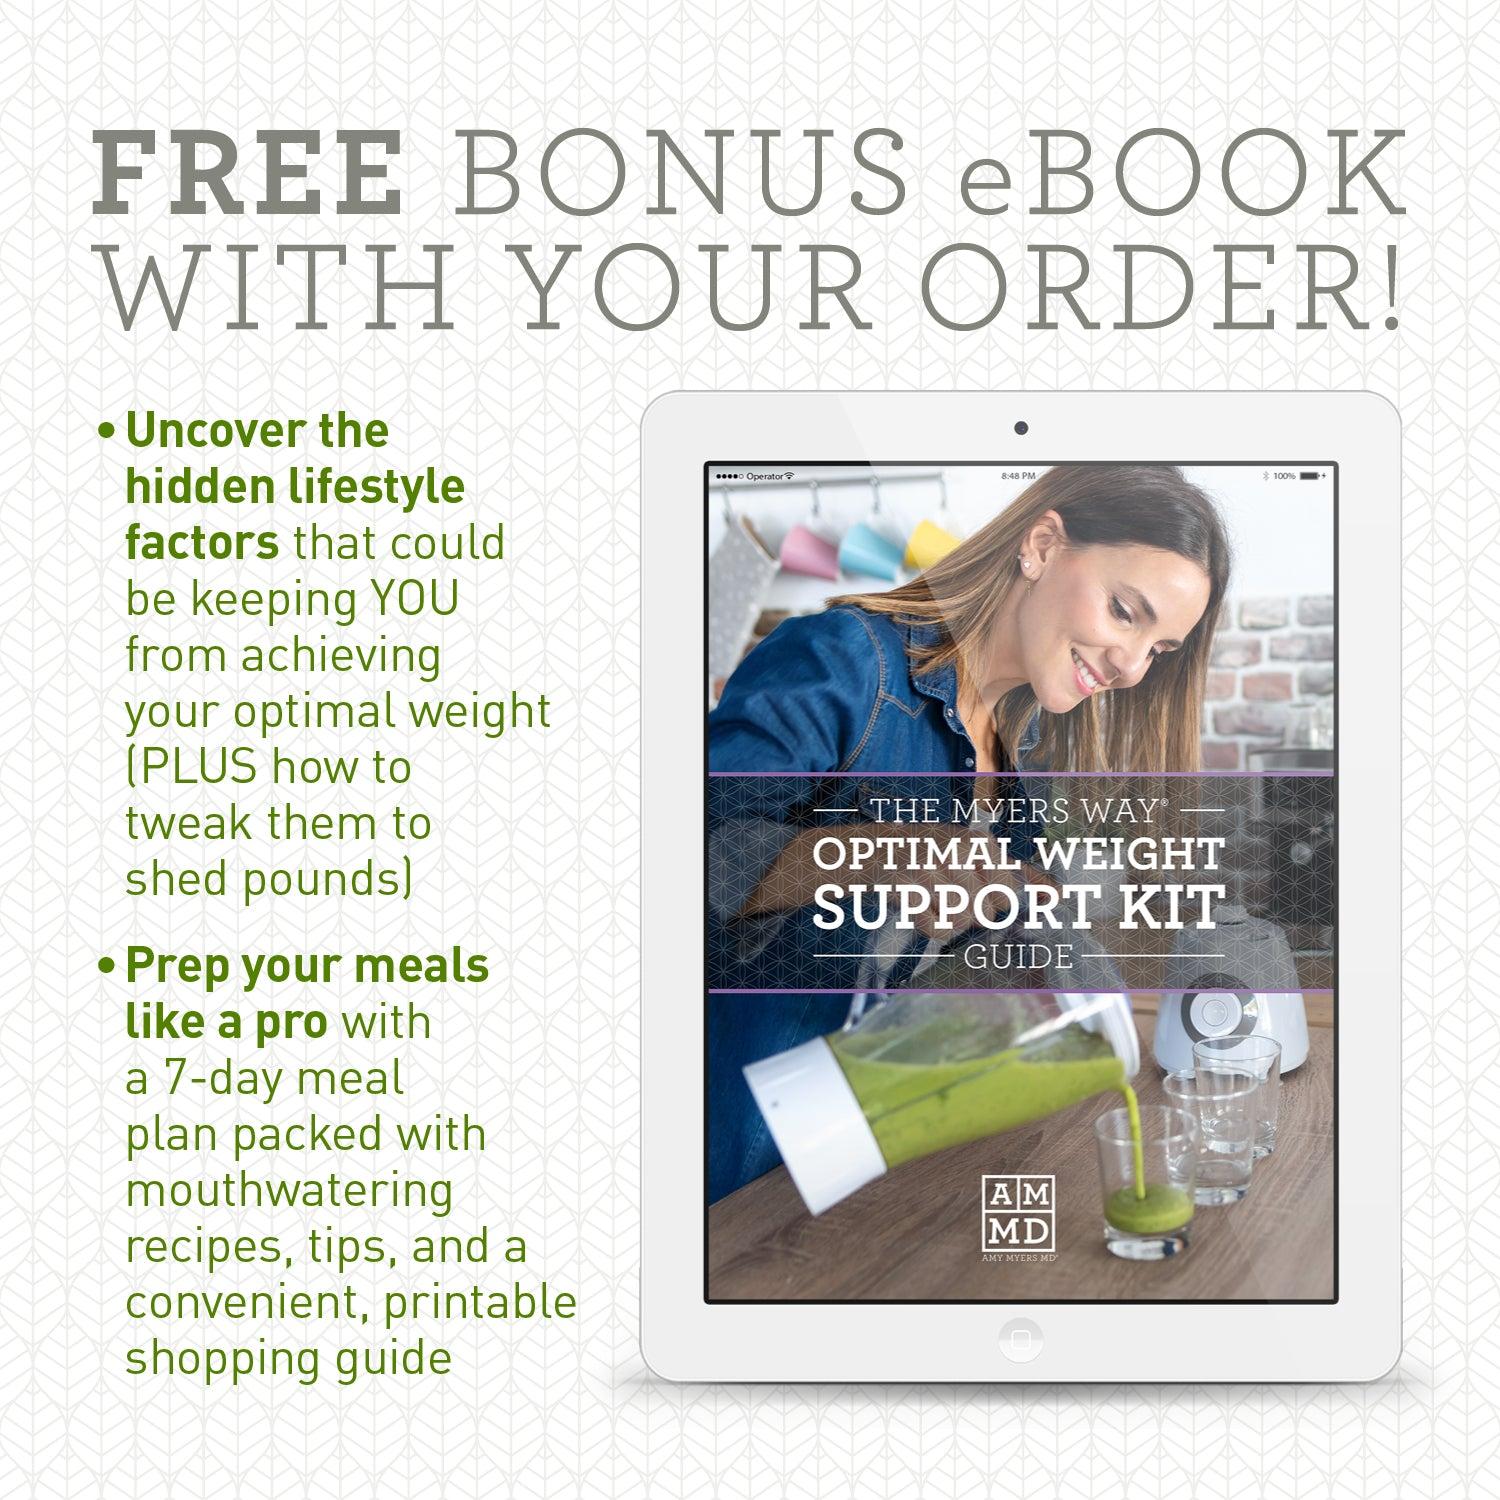 Optimal Weight Support Kit Guide eBook - Cover Image - Amy Myers MD®